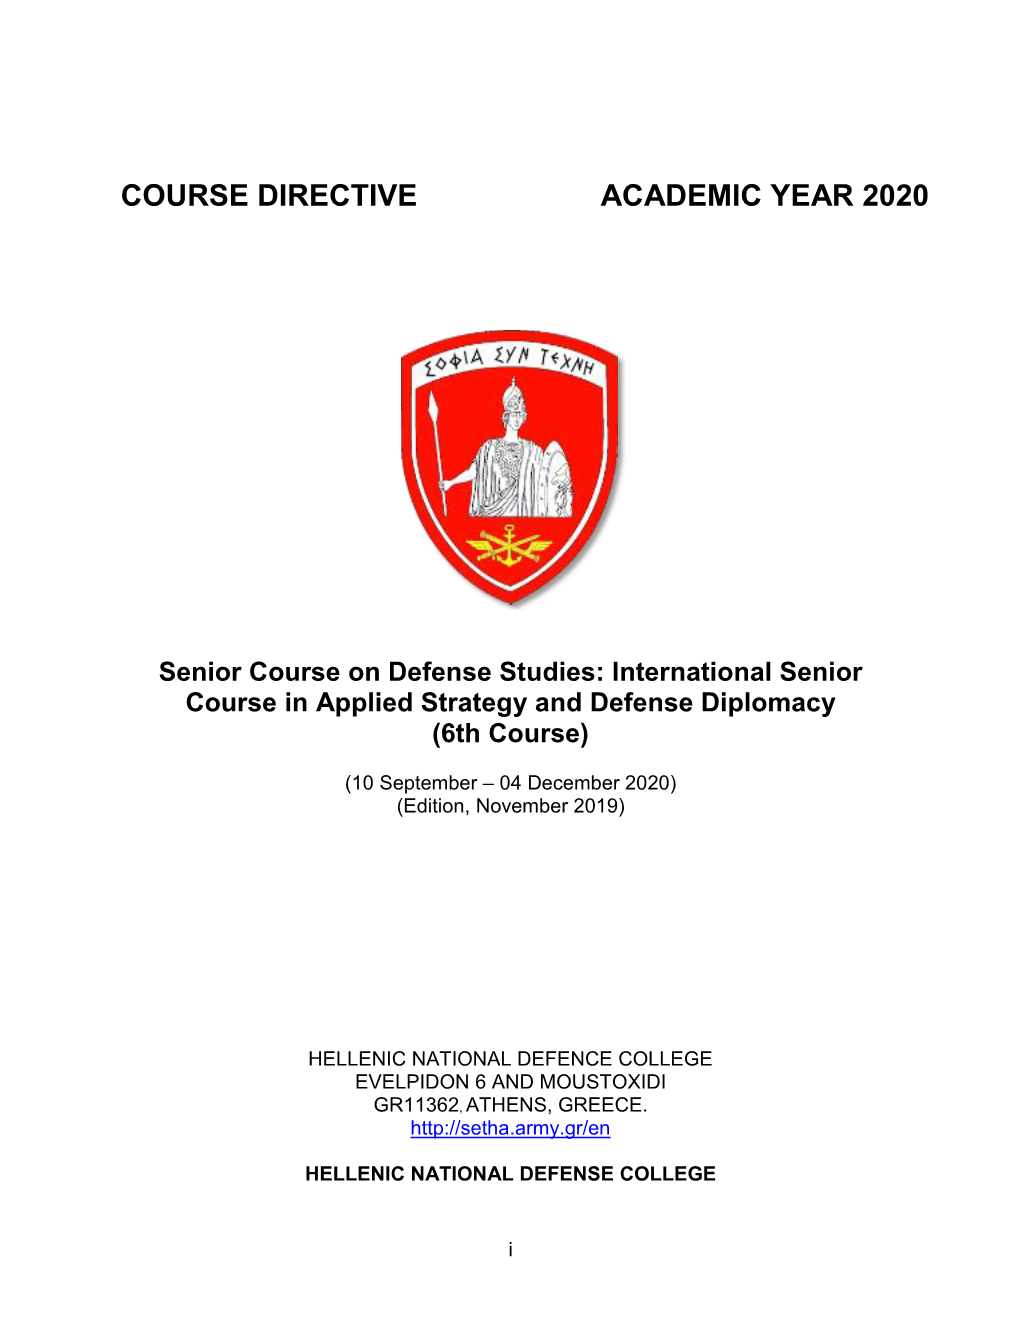 Course Directive Academic Year 2020